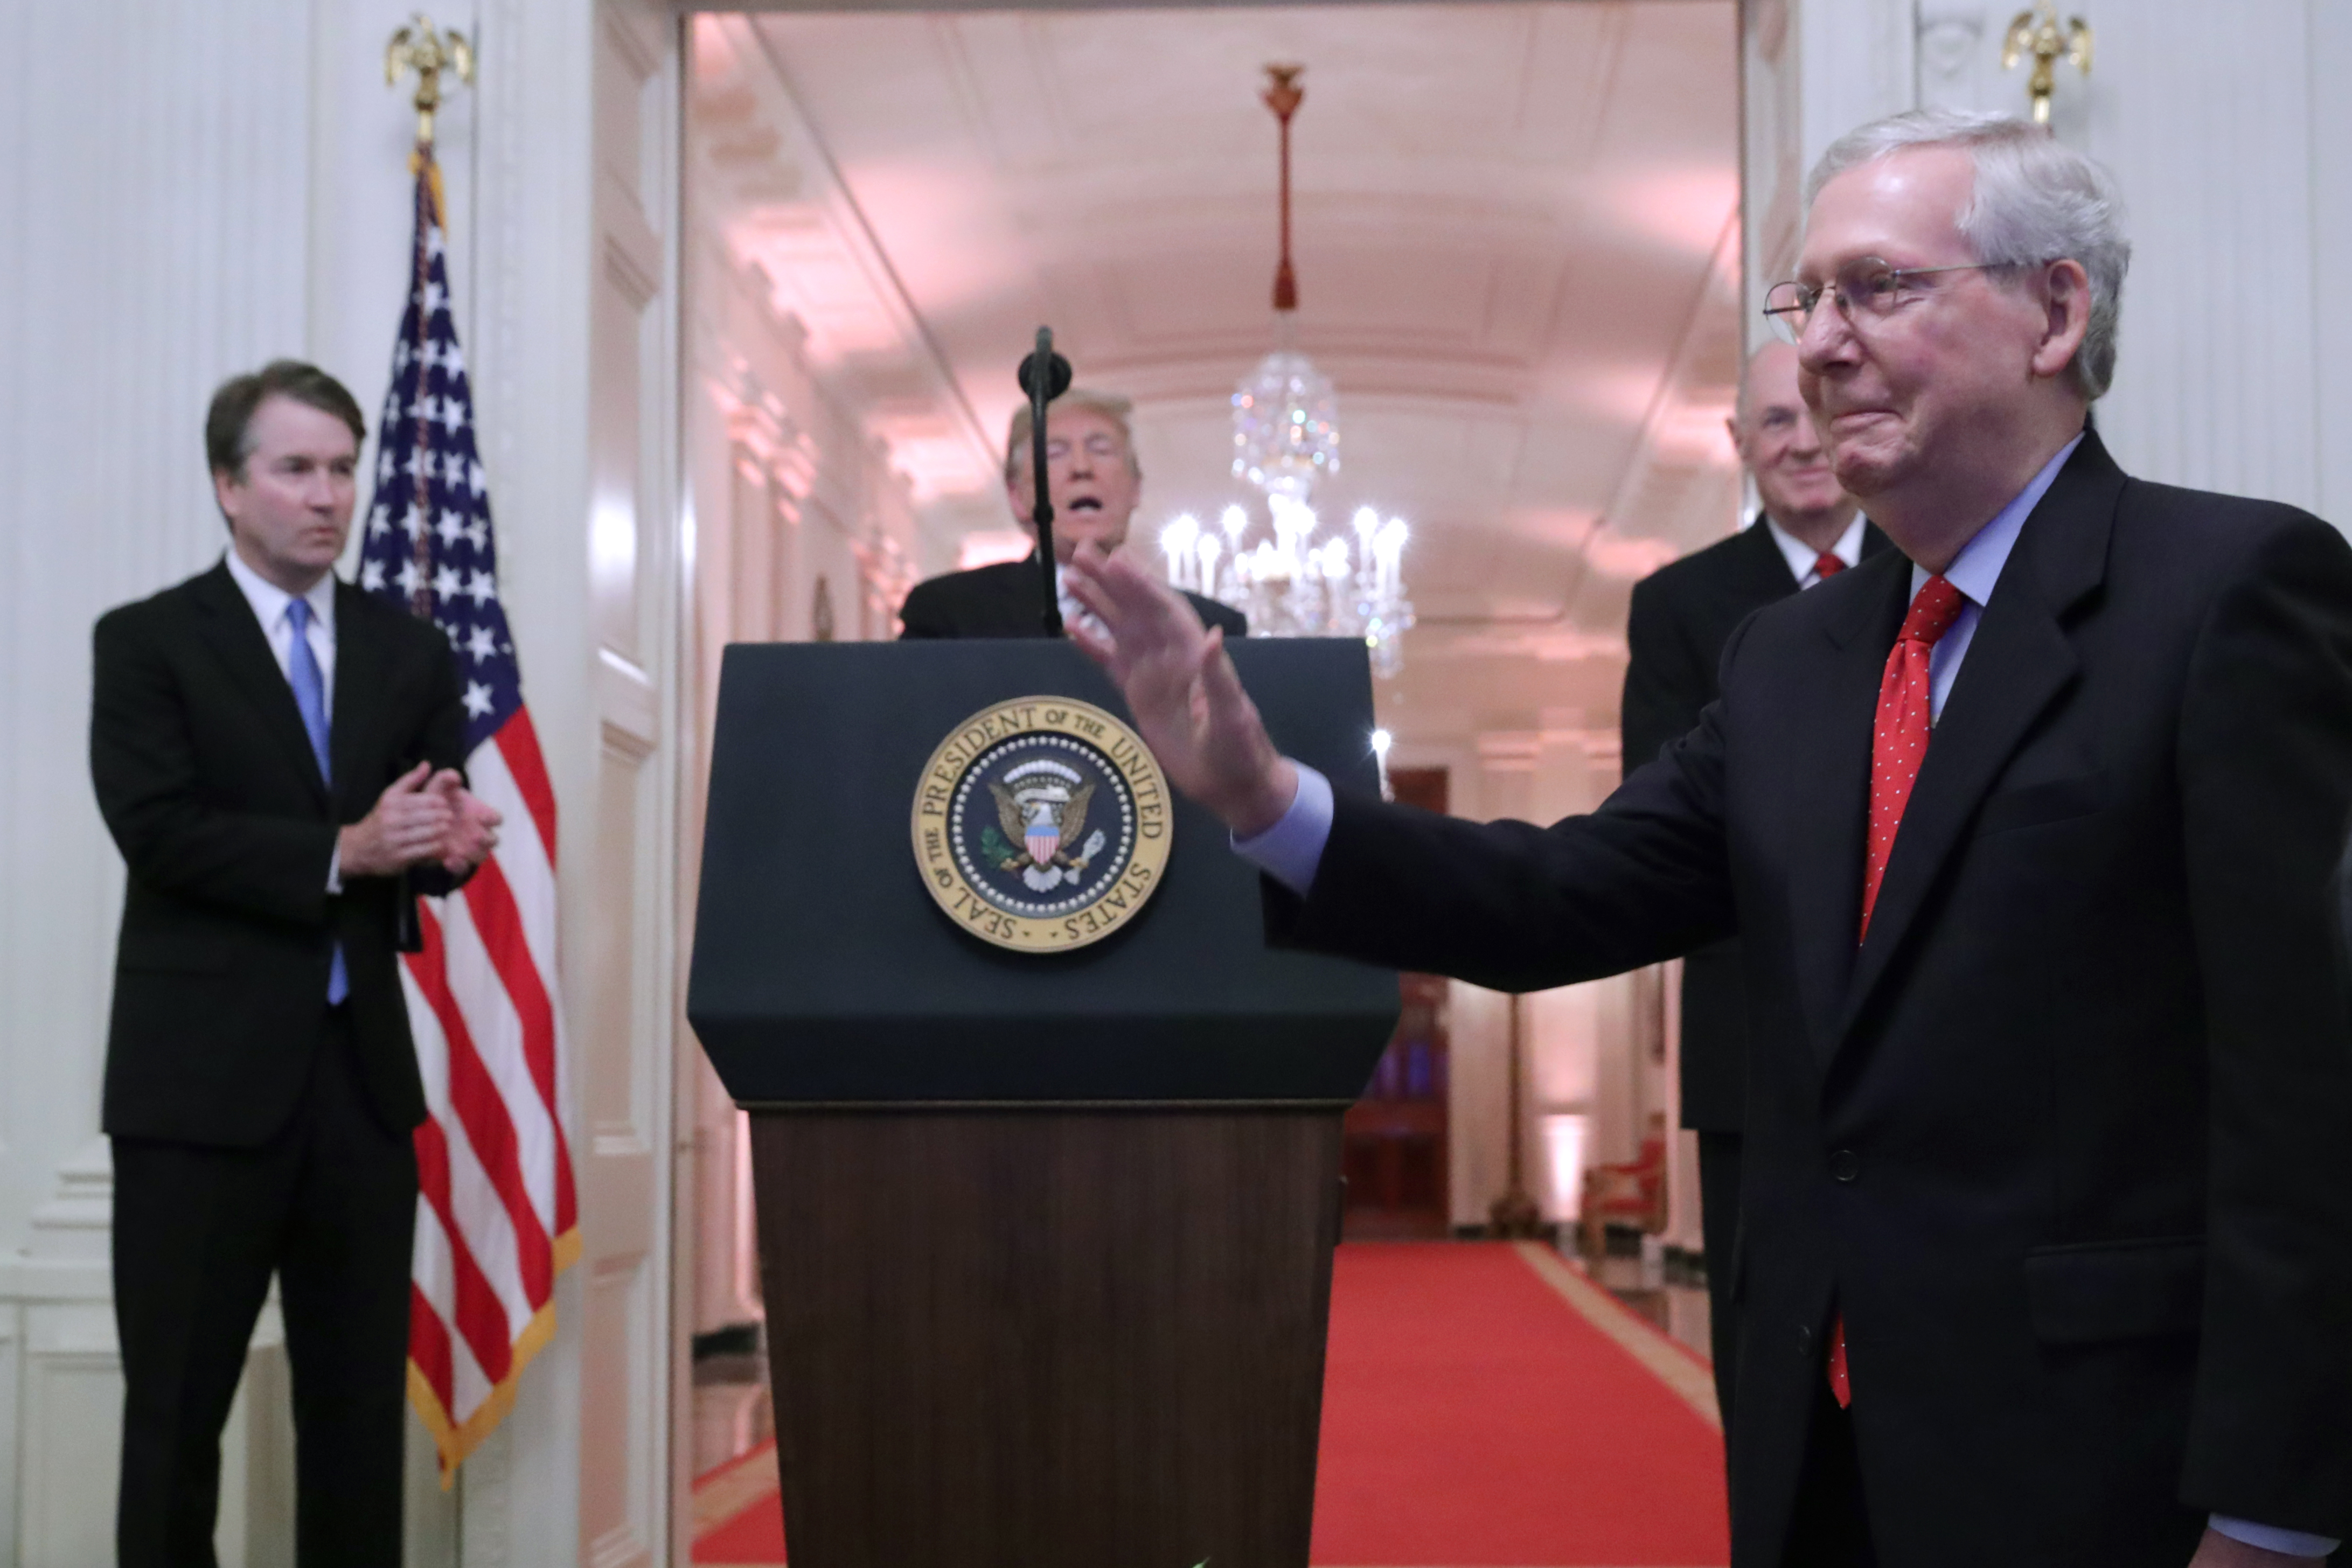 McConnell waves in front of a podium, with Trump and Kavanaugh in the background at the White House.